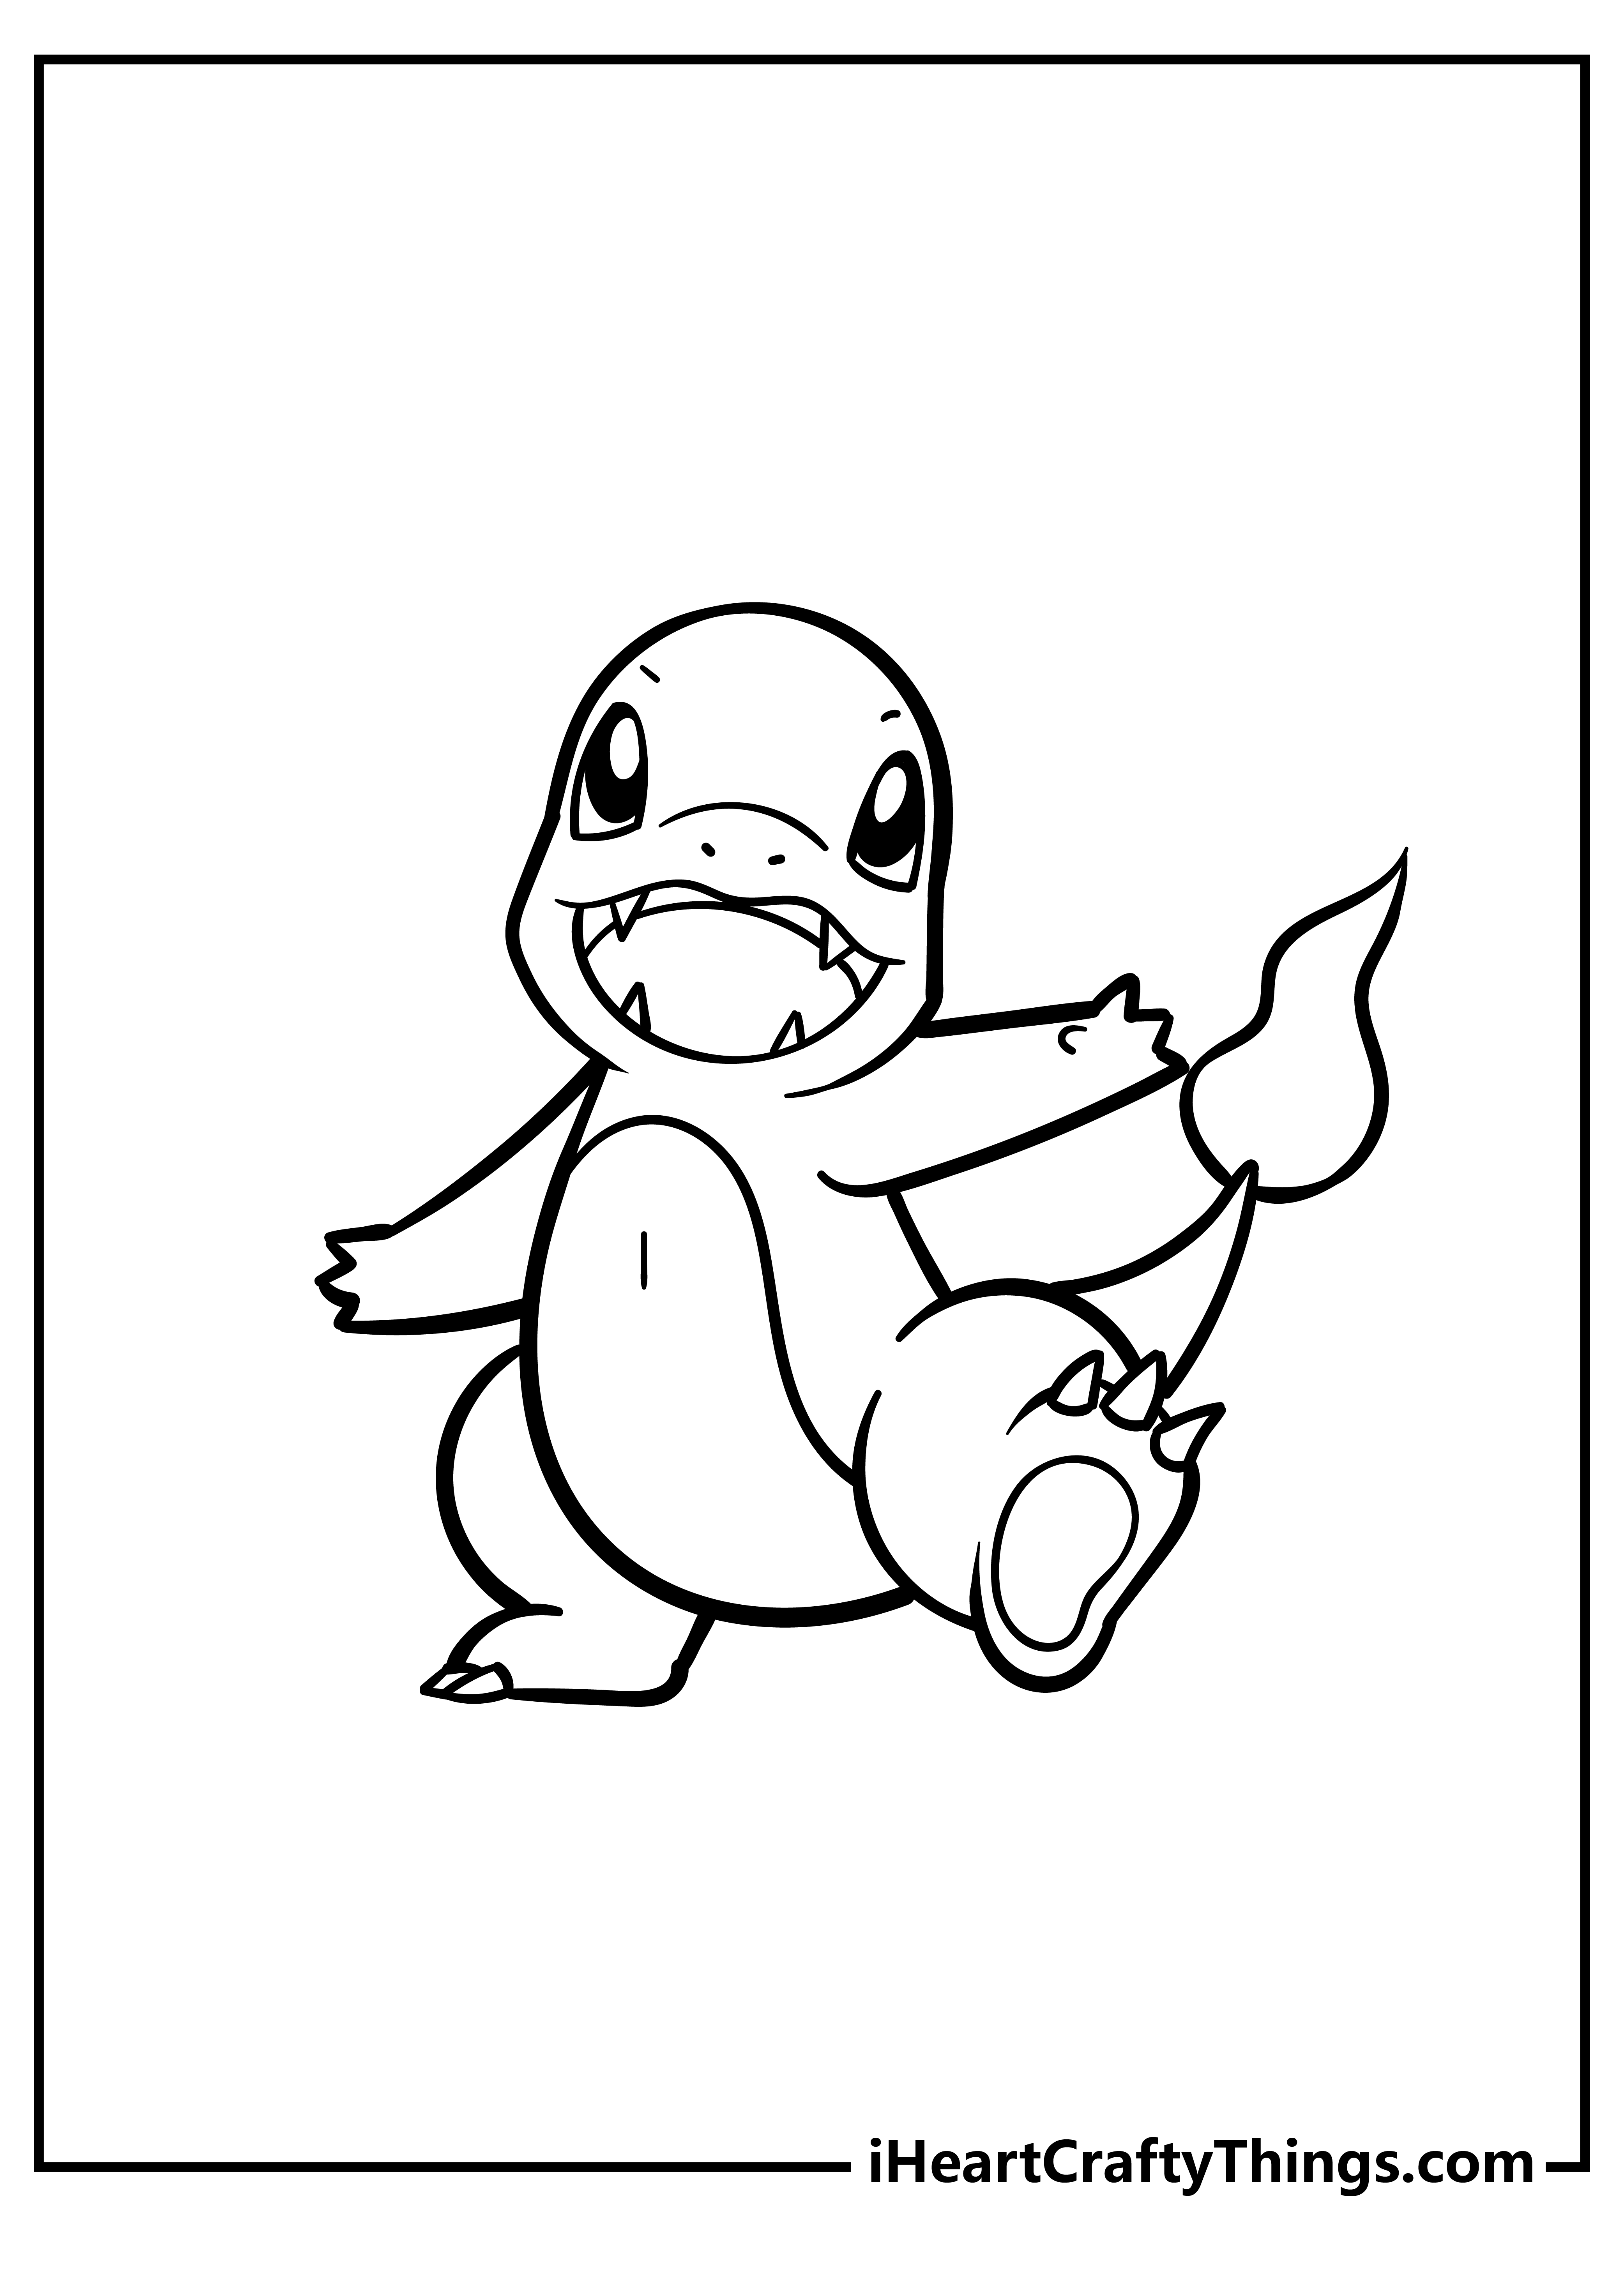 Charmander Coloring Pages for preschoolers free printable